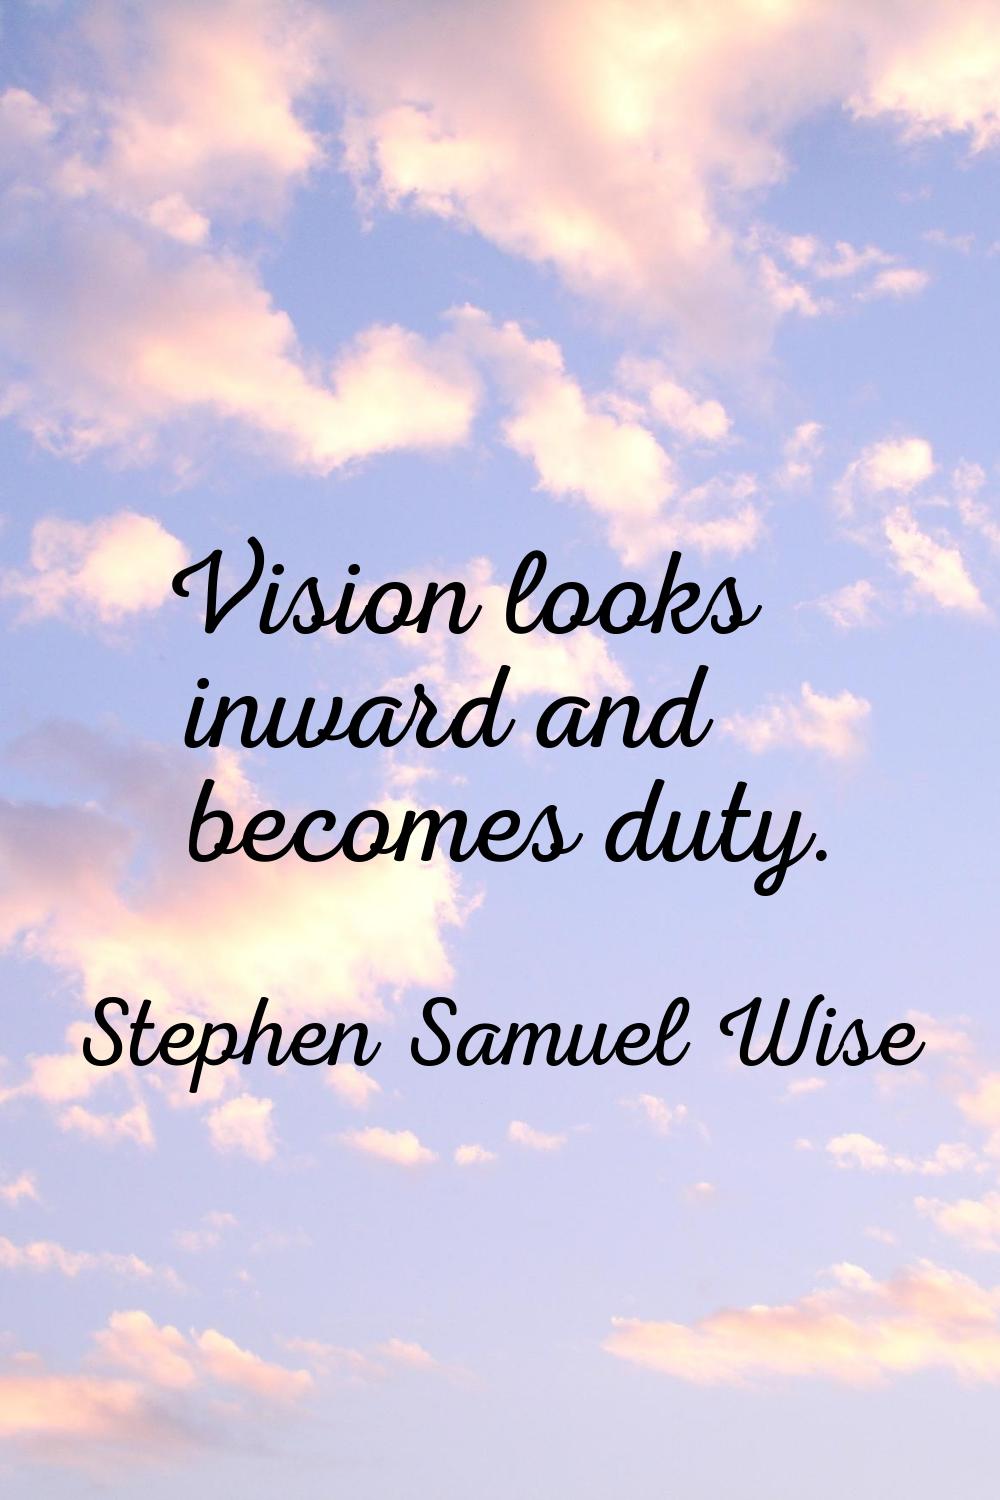 Vision looks inward and becomes duty.